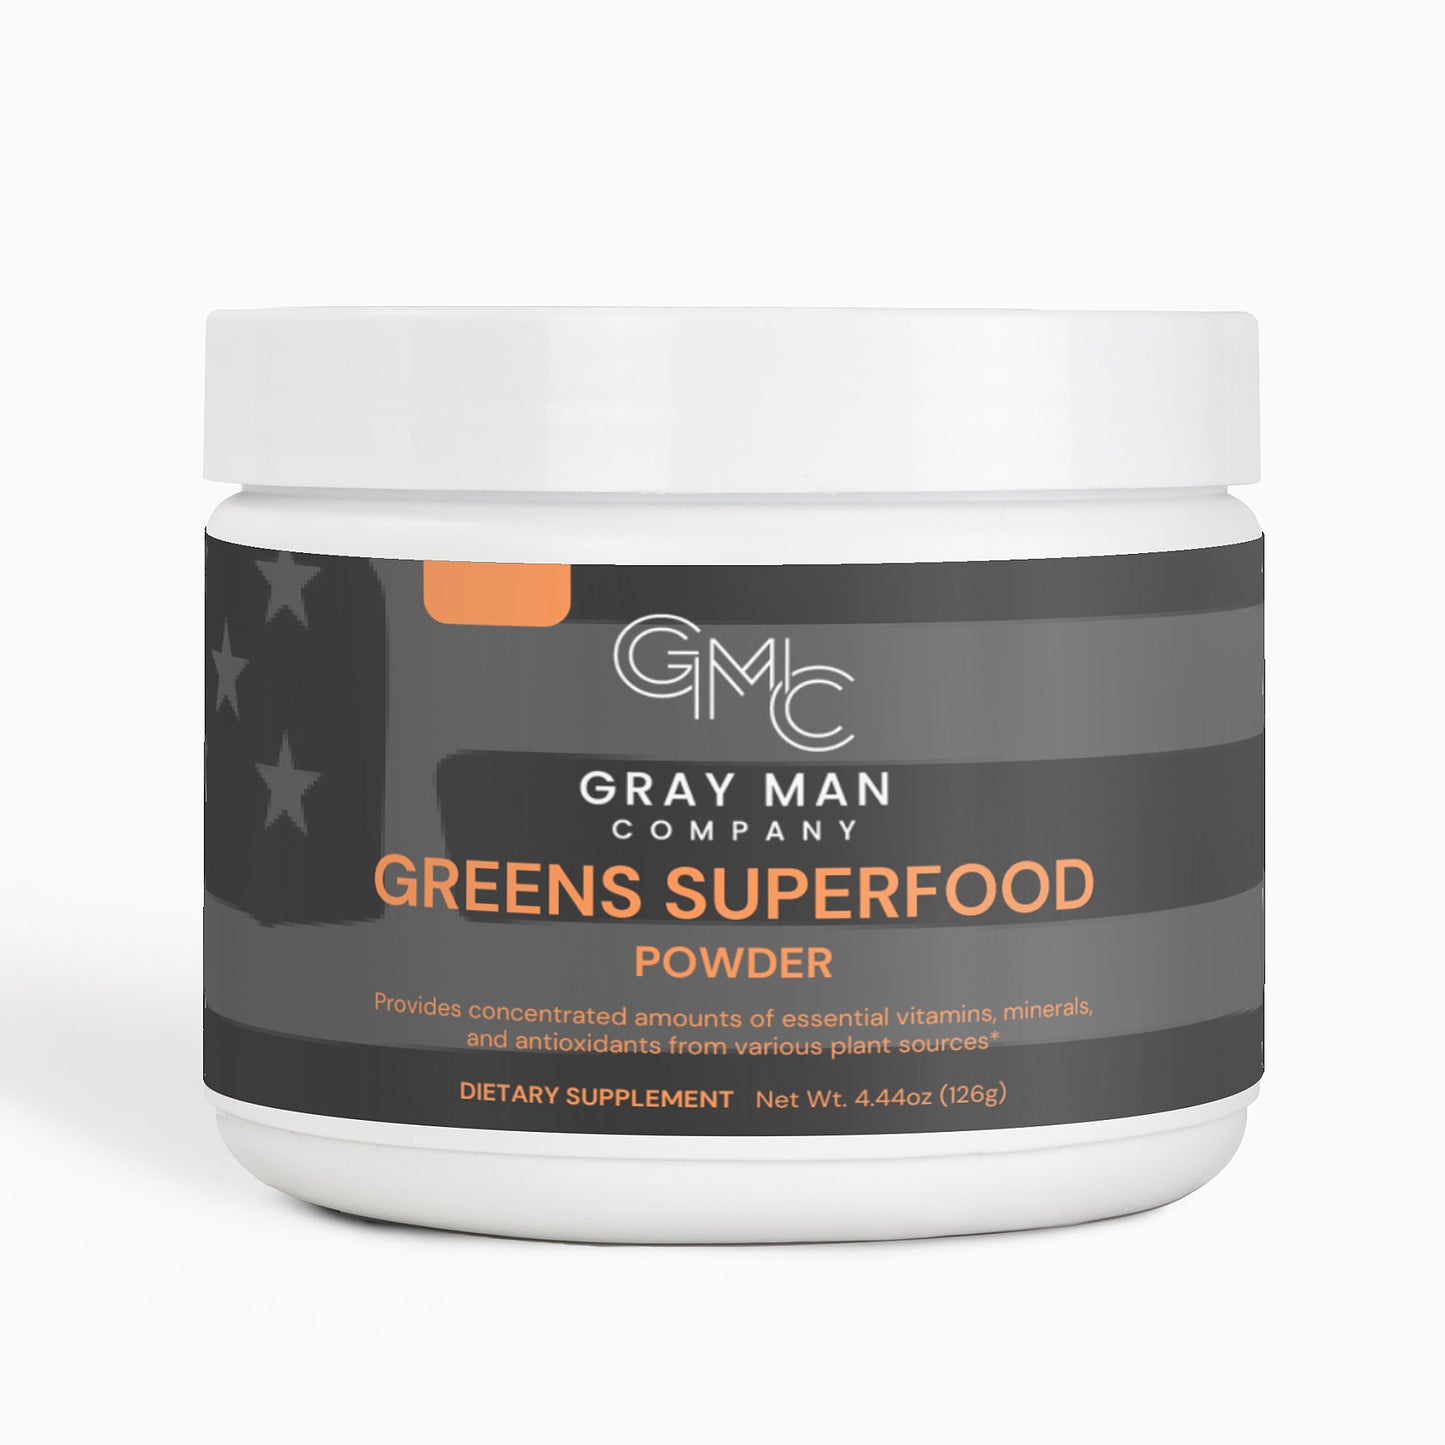 Gray Man Company Greens Superfood Performance Health Supplement